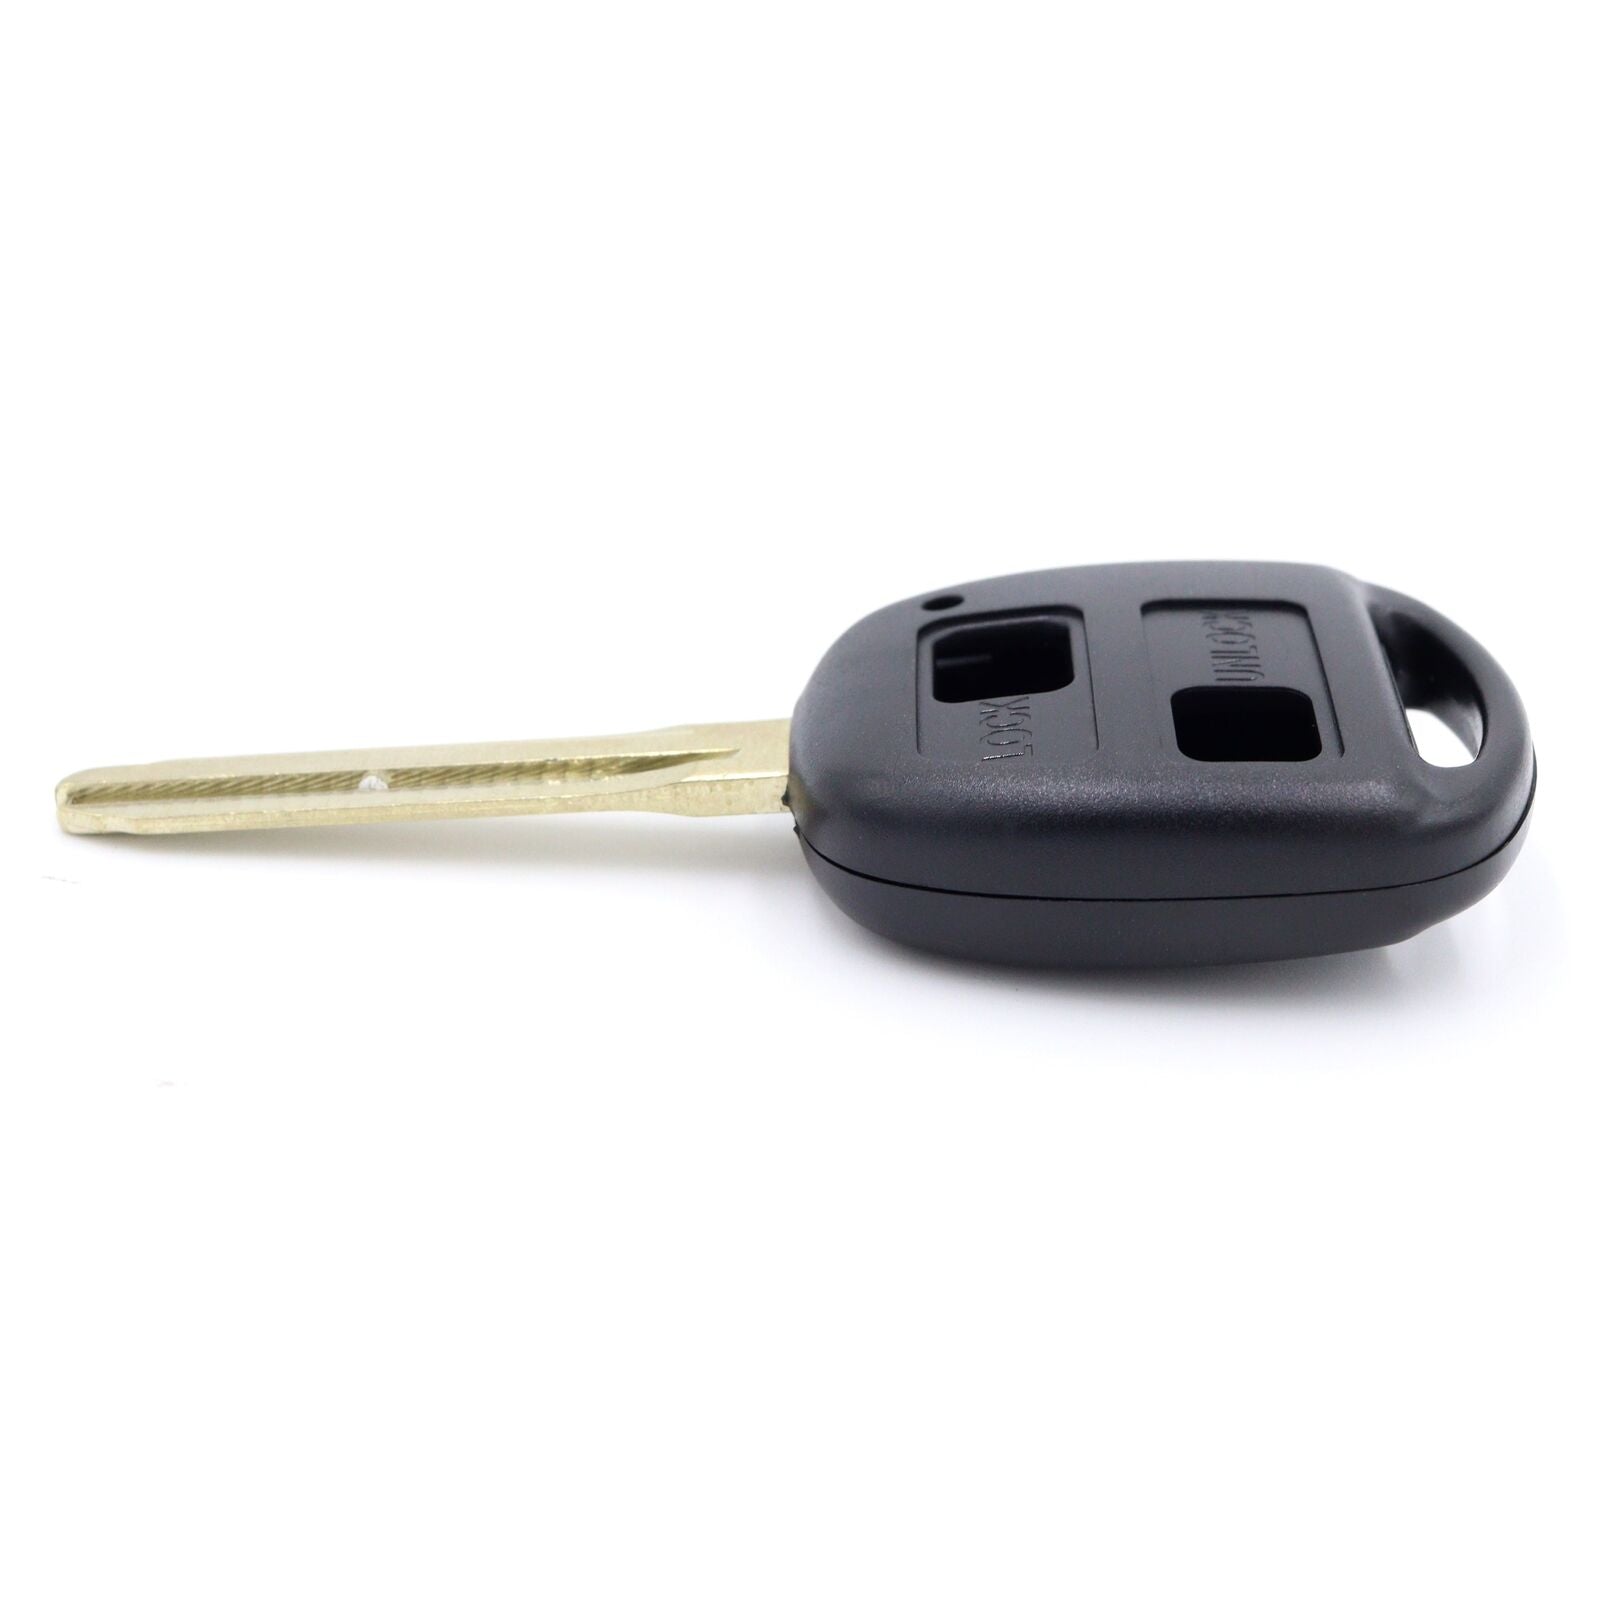 Compatible With Toyota Prado RAV4 Corolla Remote Car Key Blank Shell/Case Pack of 2 - Office Catch